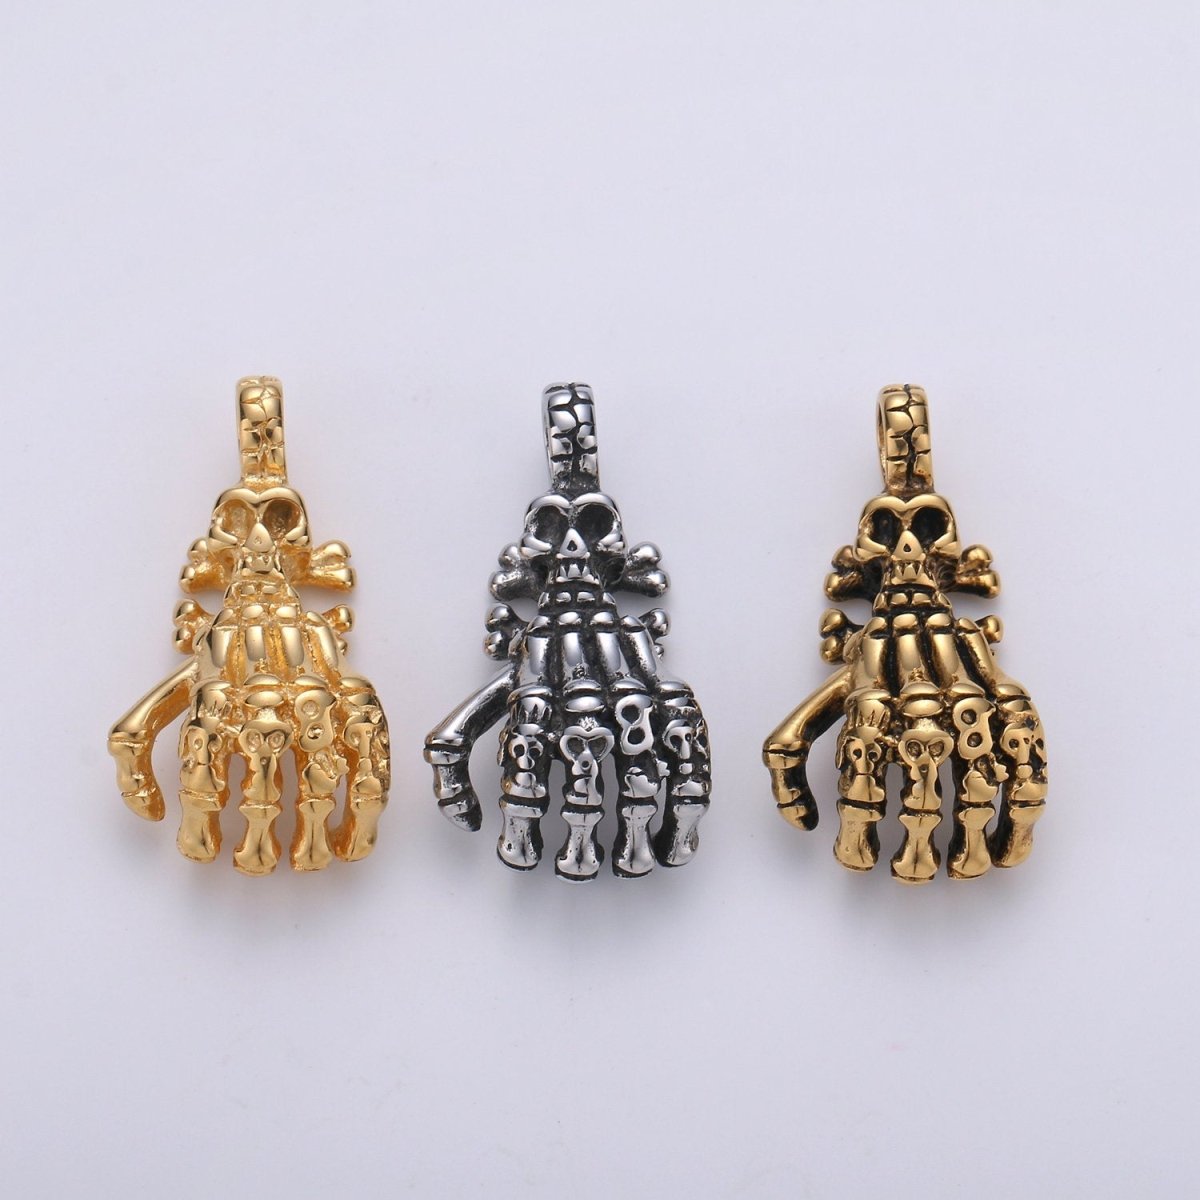 Gold Skeleton Hand Charm Zombie Hand Charm Silver Halloween Charm Tibetan Silver Charms For Men Jewelry Making in Stailness Steel Finding J-793~J-795 - DLUXCA